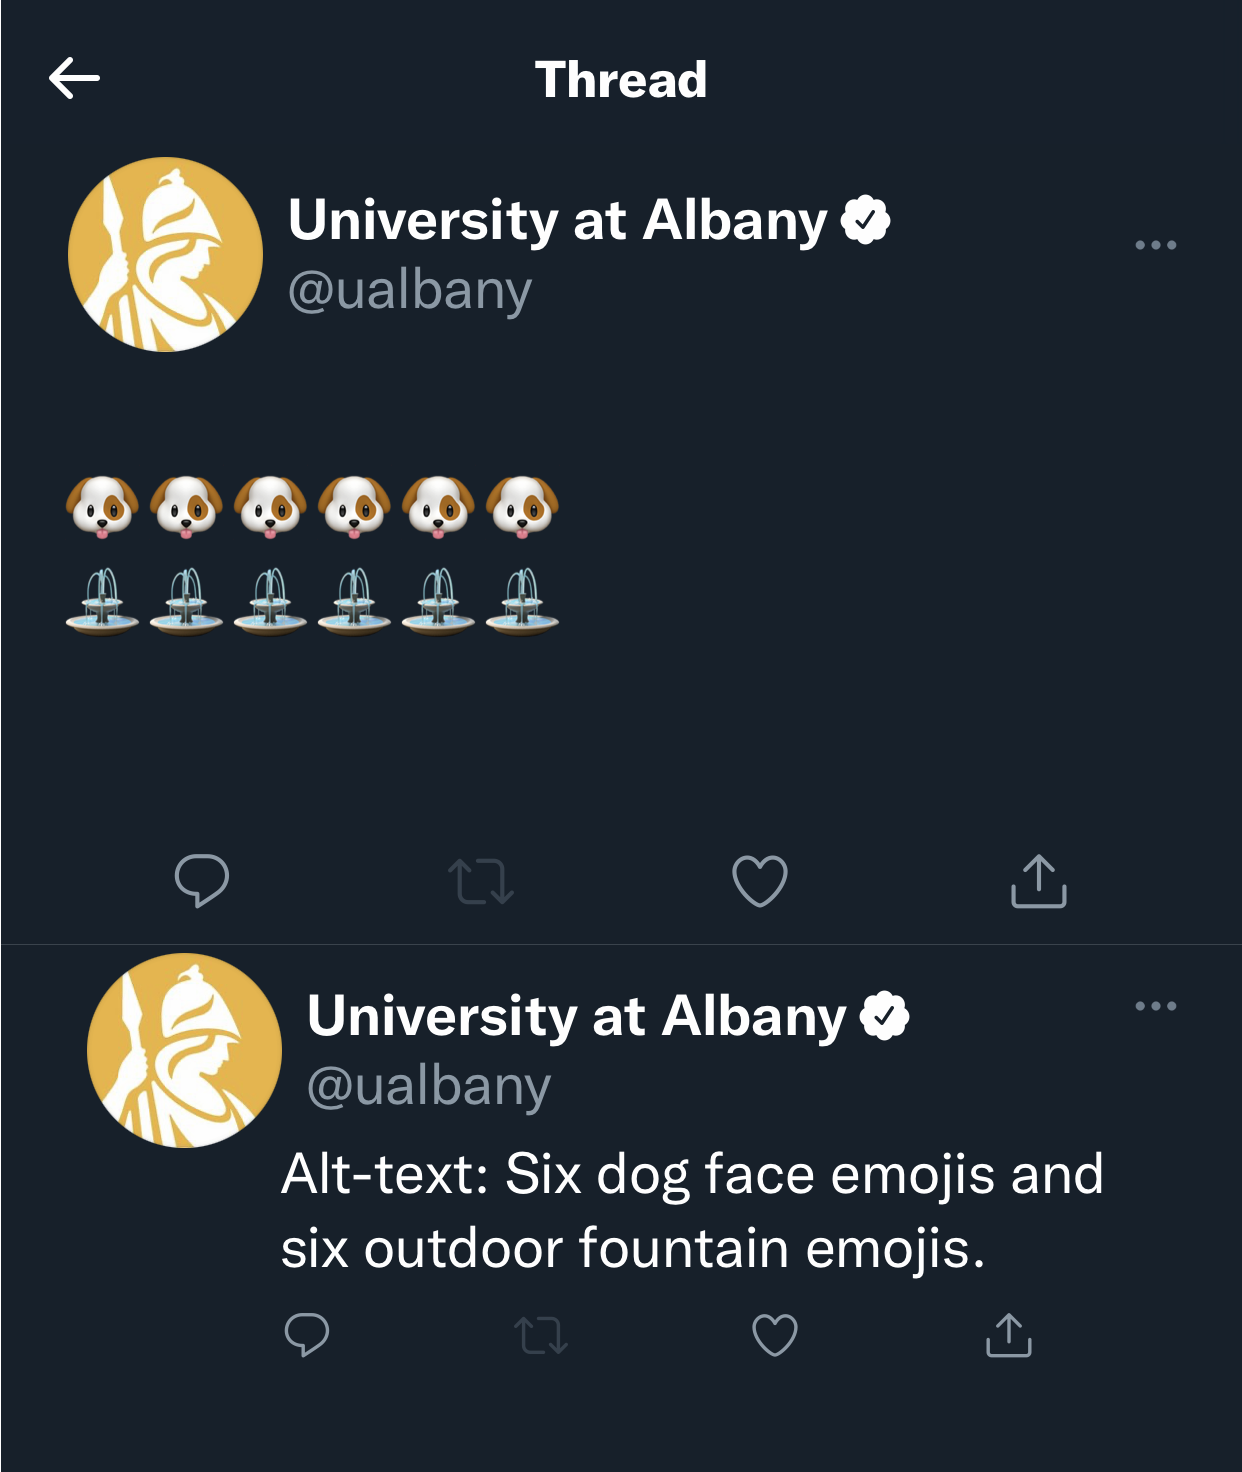 A Twitter thread with two tweets from the UAlbany account. The first tweet six dog face emojis and six outdoor fountain emojis. The second tweet reads, "Alt-text: Six dog face emojis and six outdoor fountain emojis."